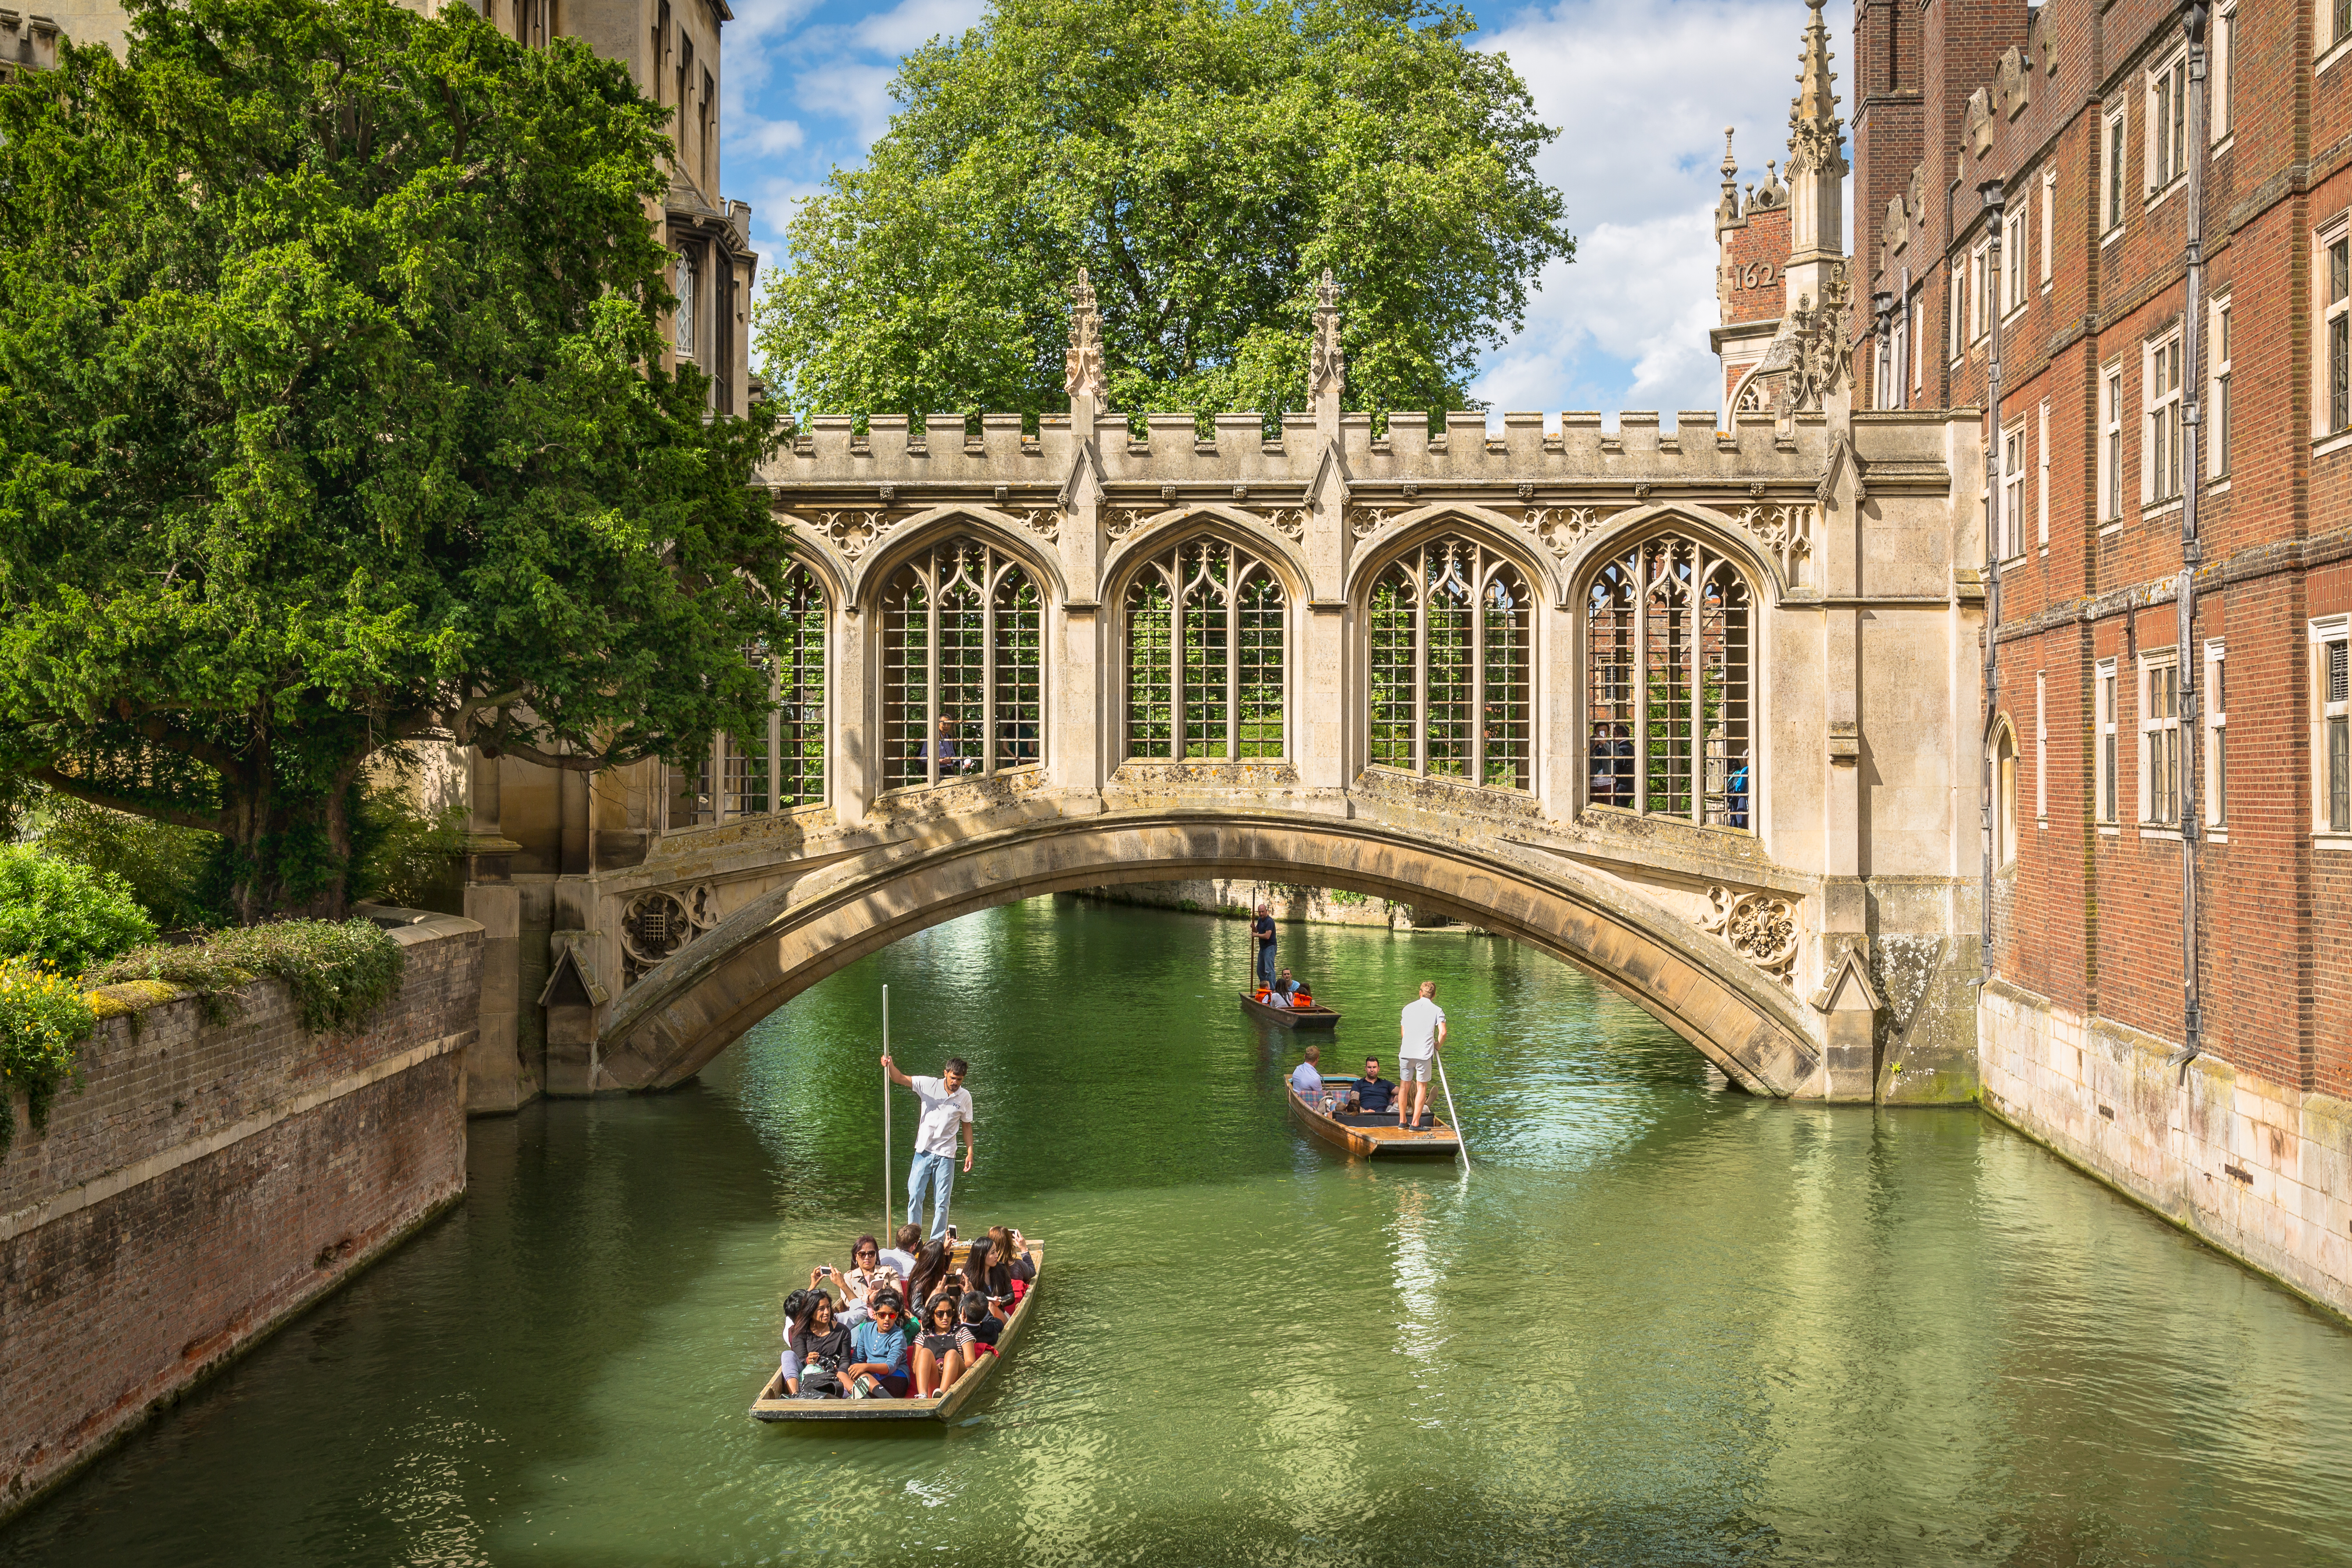 St John's College Cambridge: The Theory of Everything